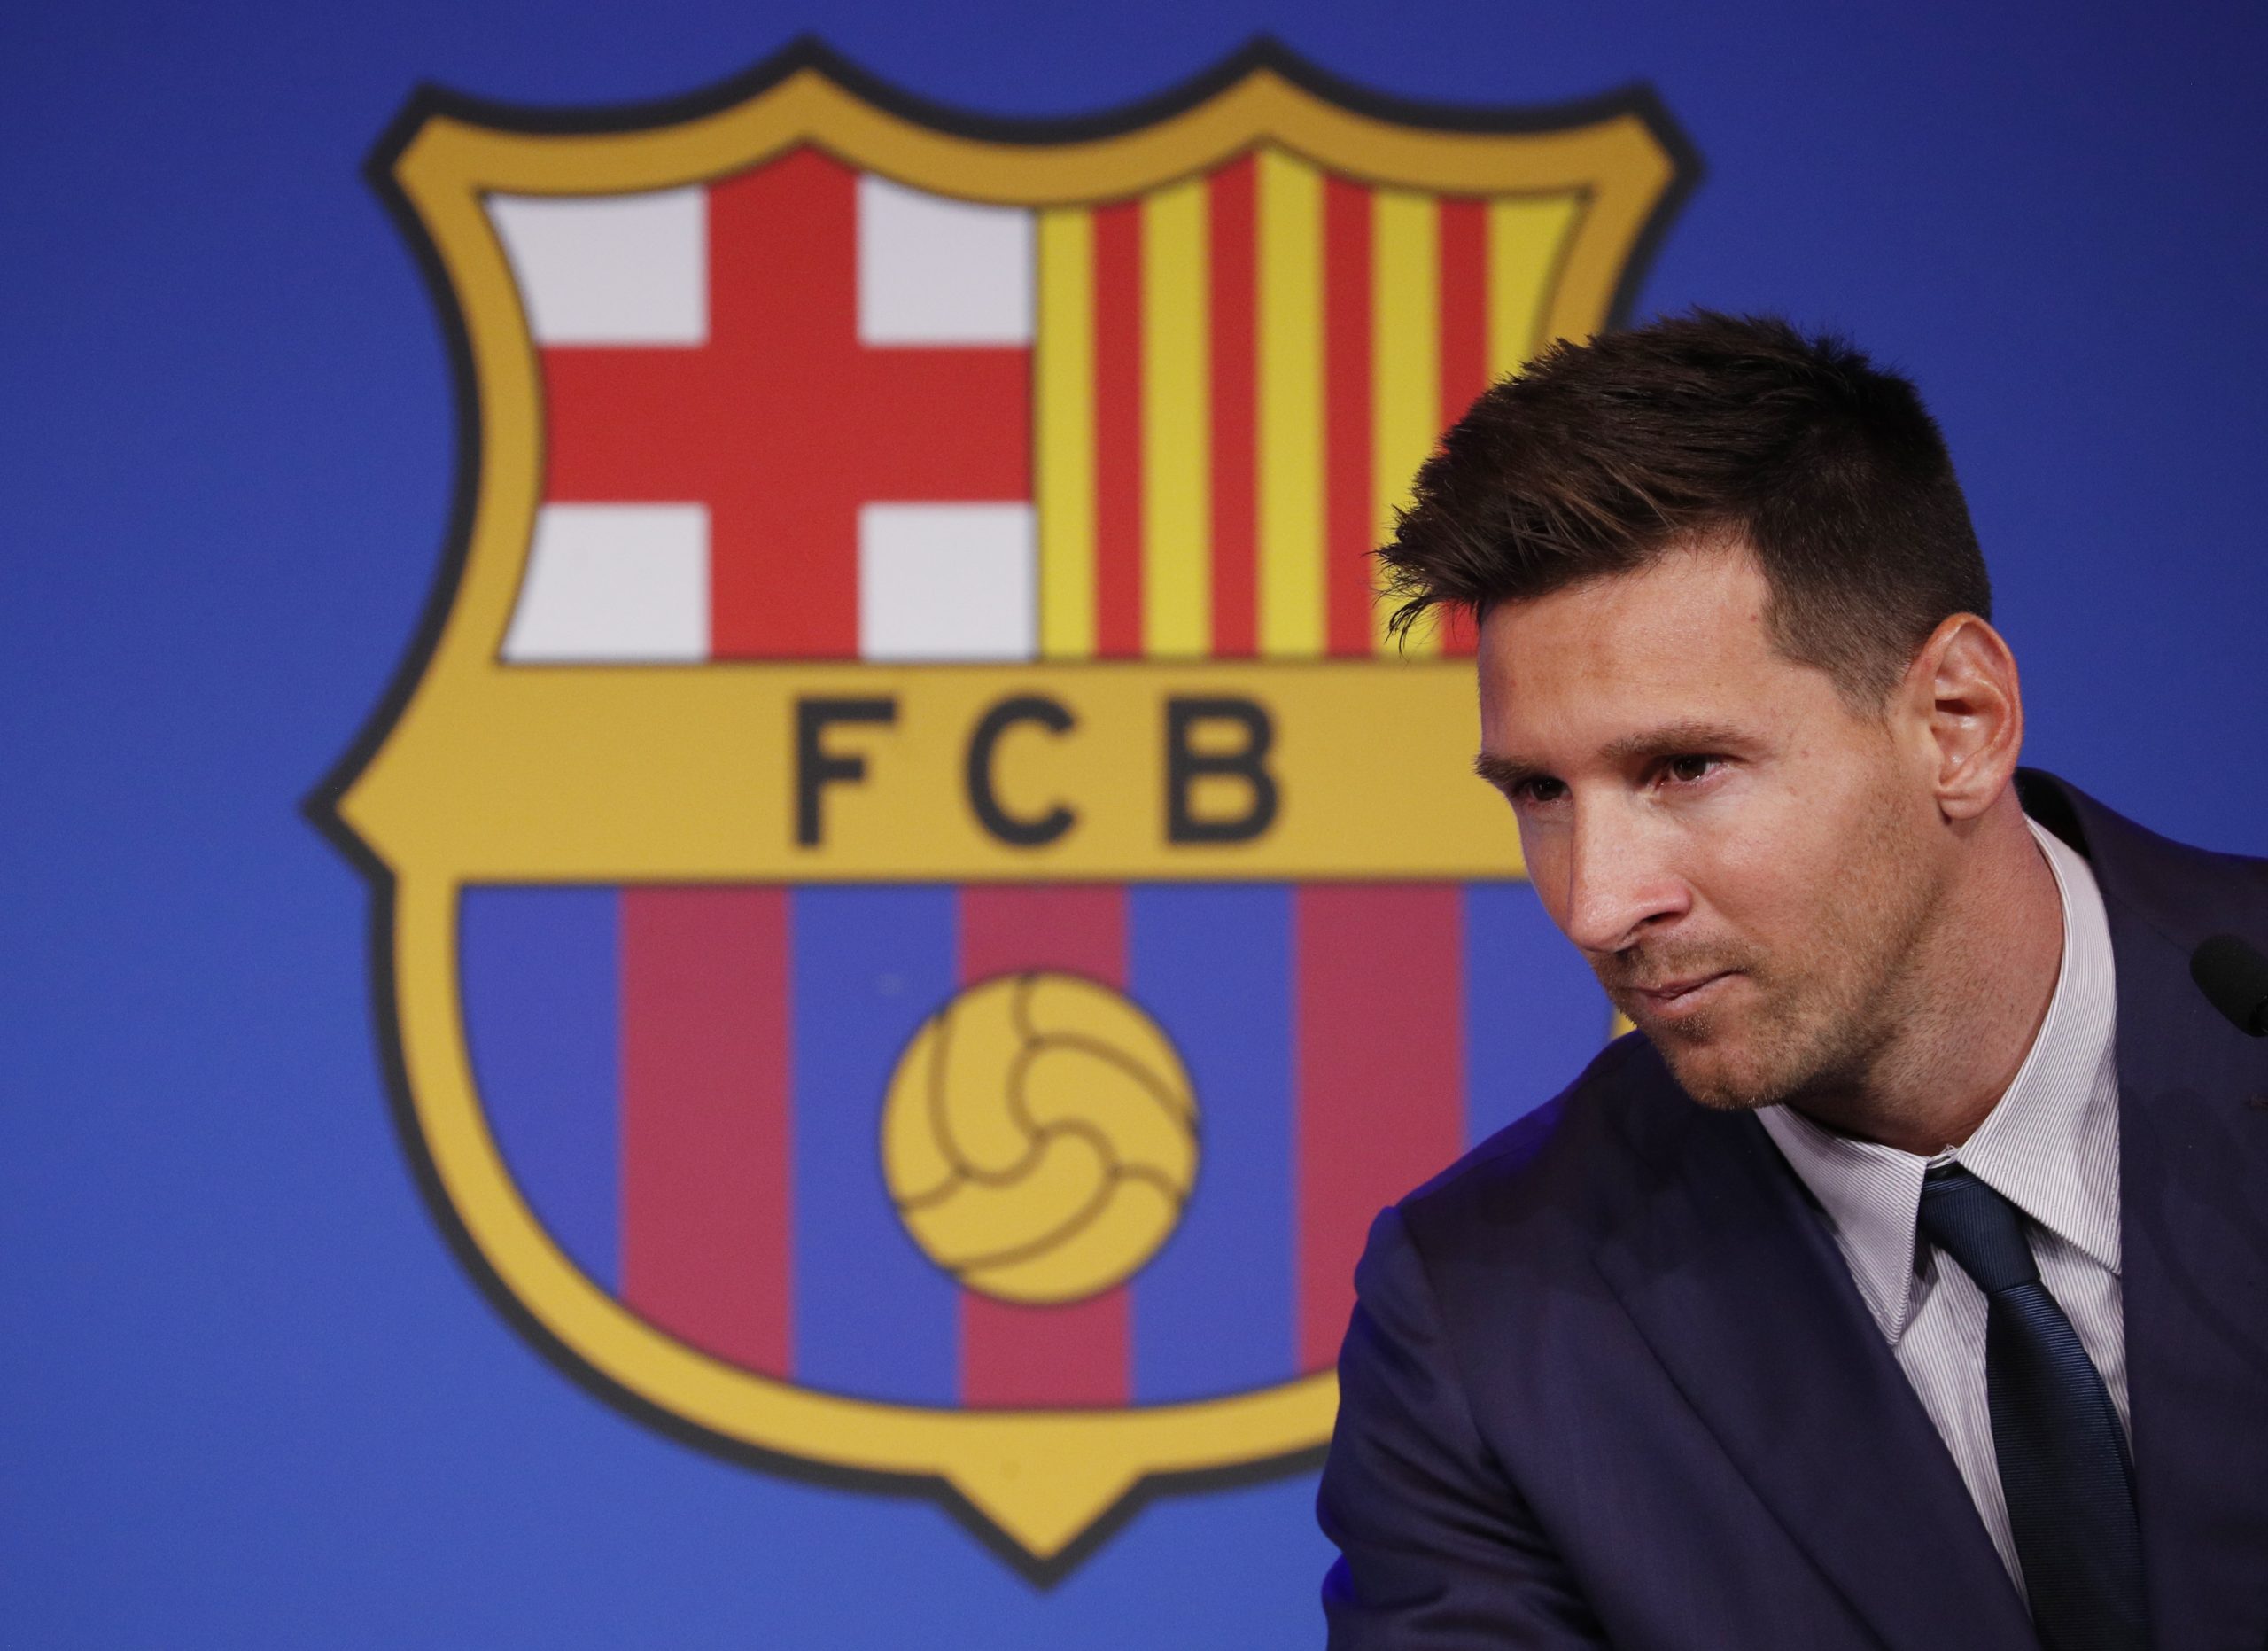 Barcelona member files complaints to block Messi move to PSG